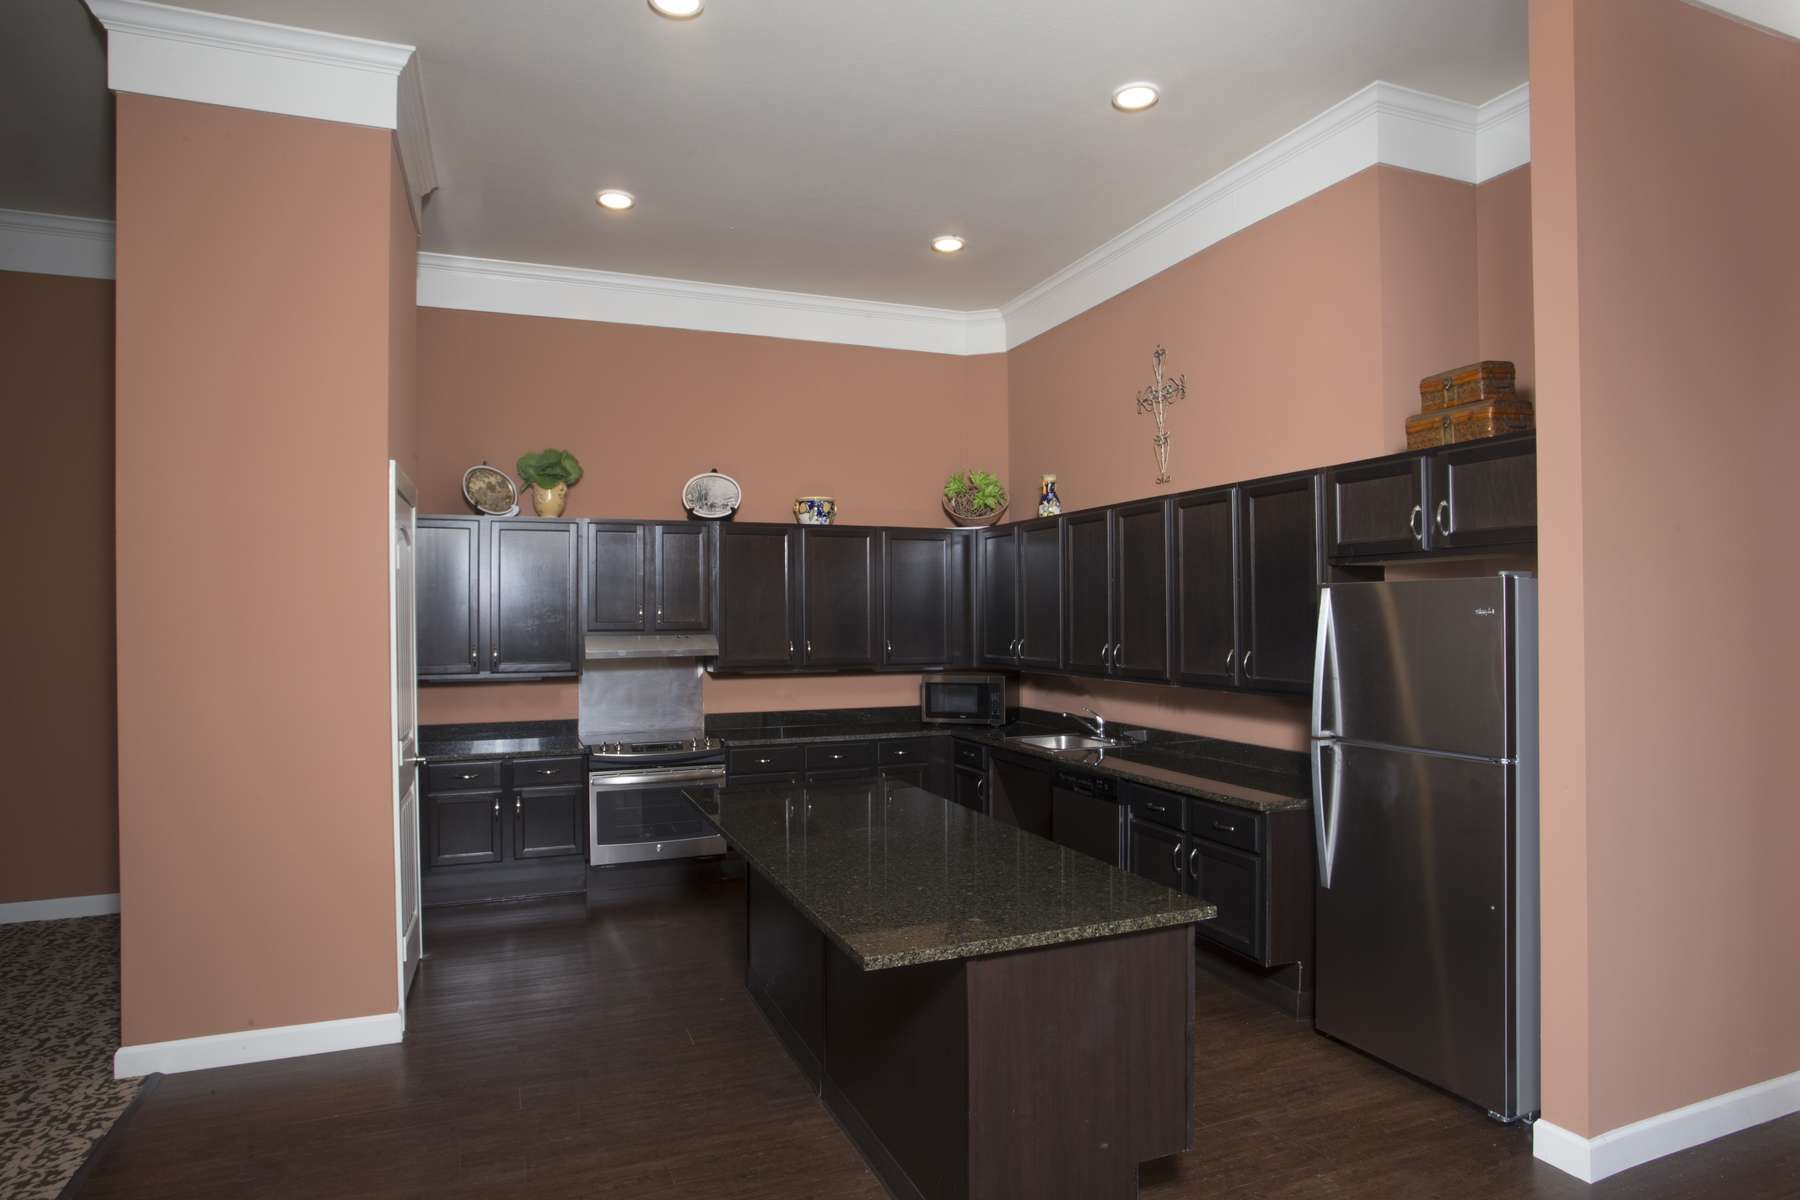 The Claiborne at Thibodaux senior apartment full kitchen with high-end design and appliances